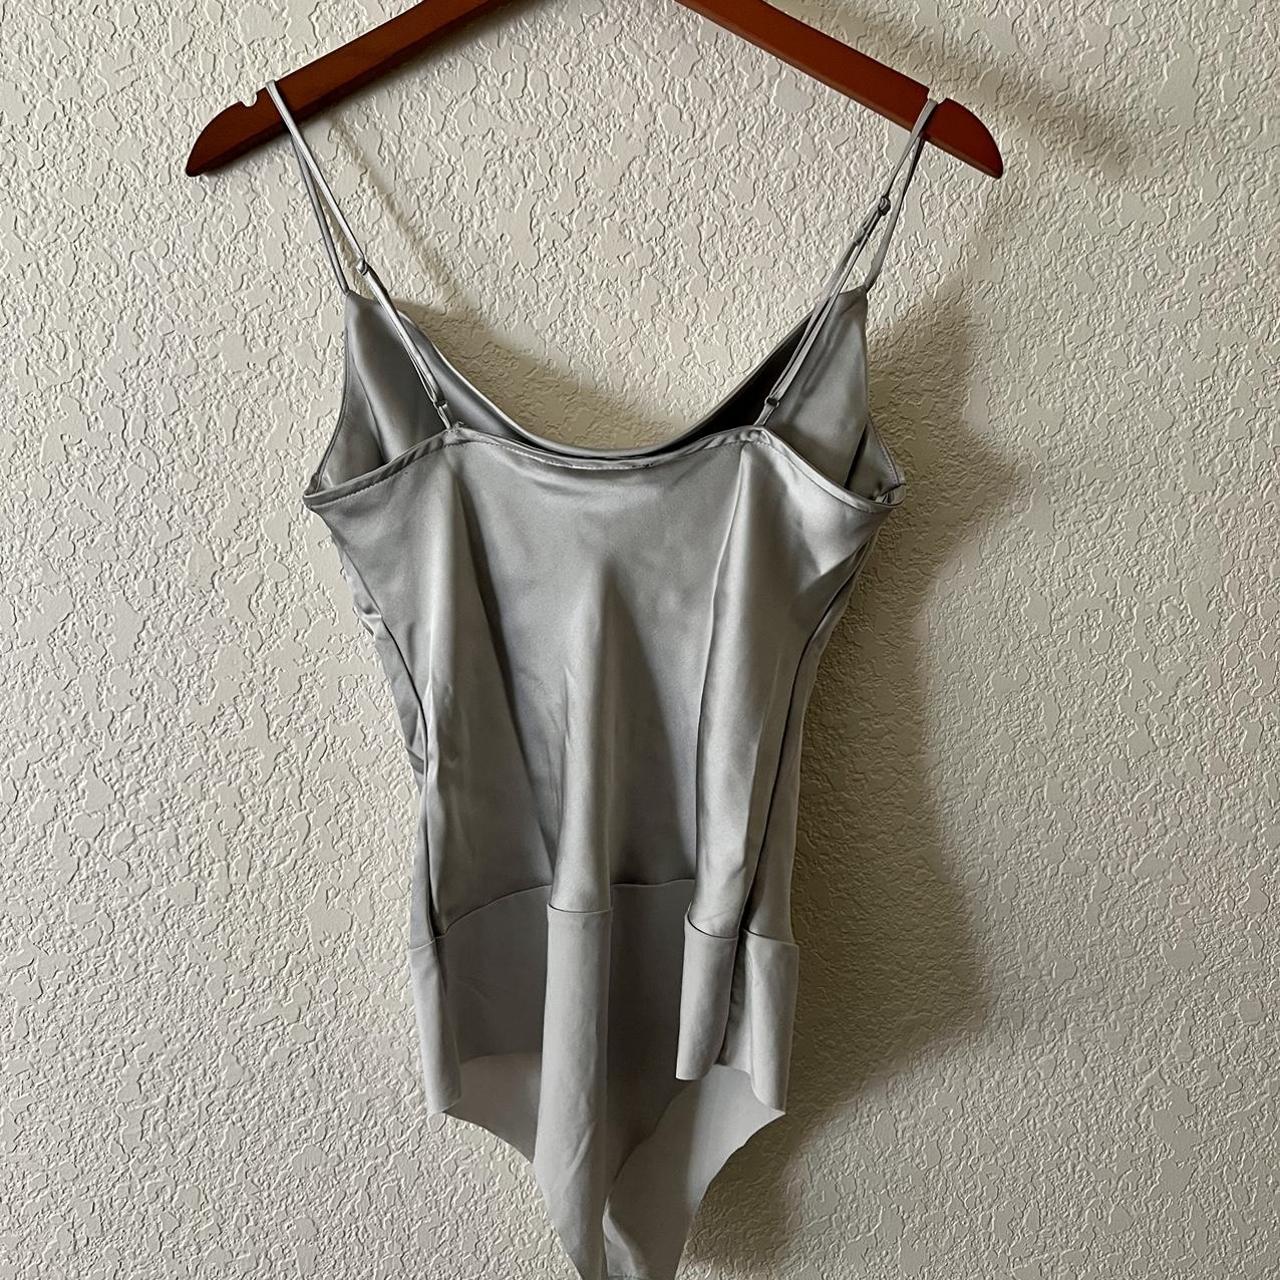 House of Harlow Women's Grey and Silver Bodysuit (2)